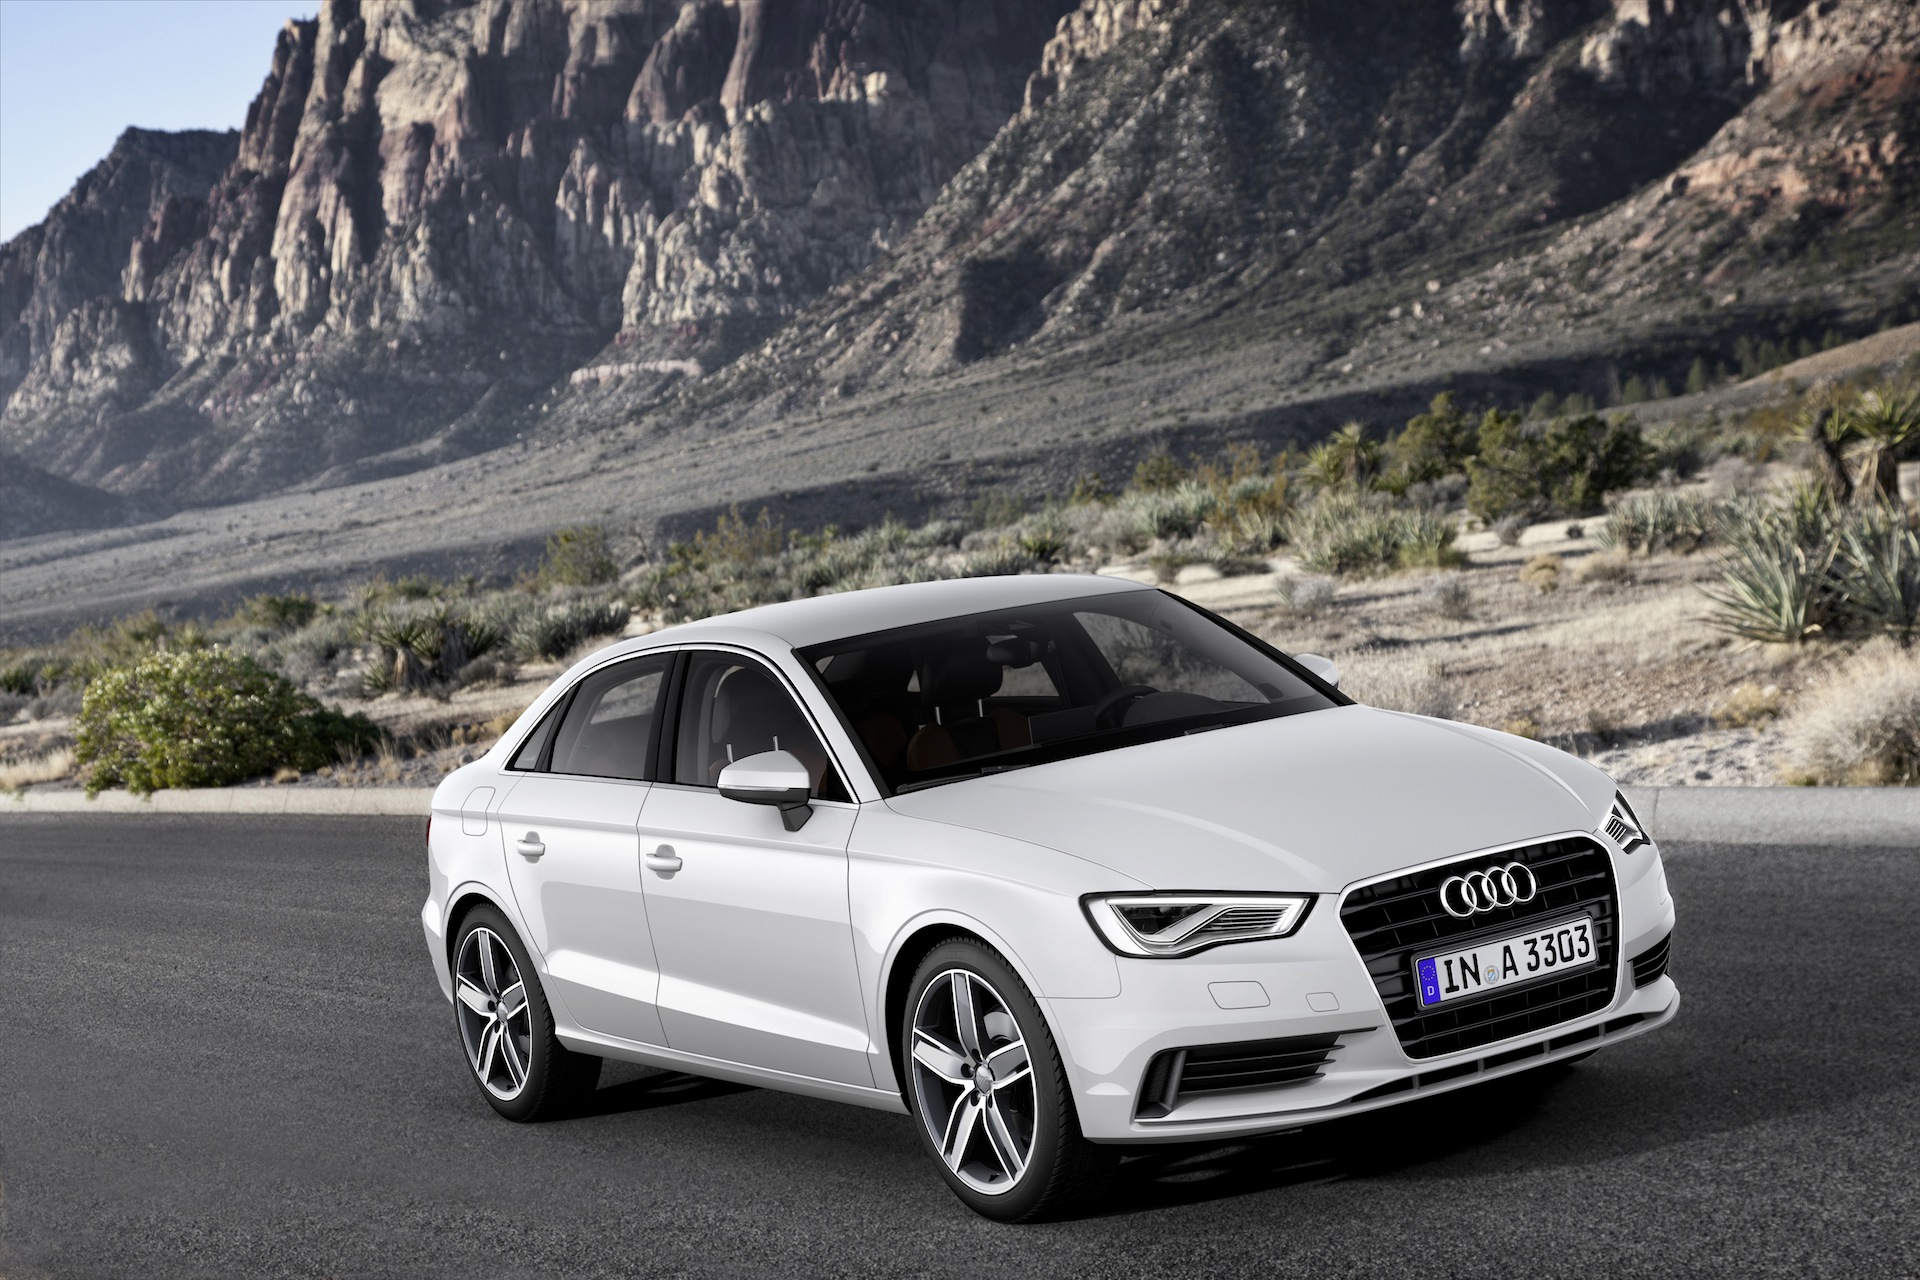 2015 Audi A3 Priced From $30,795